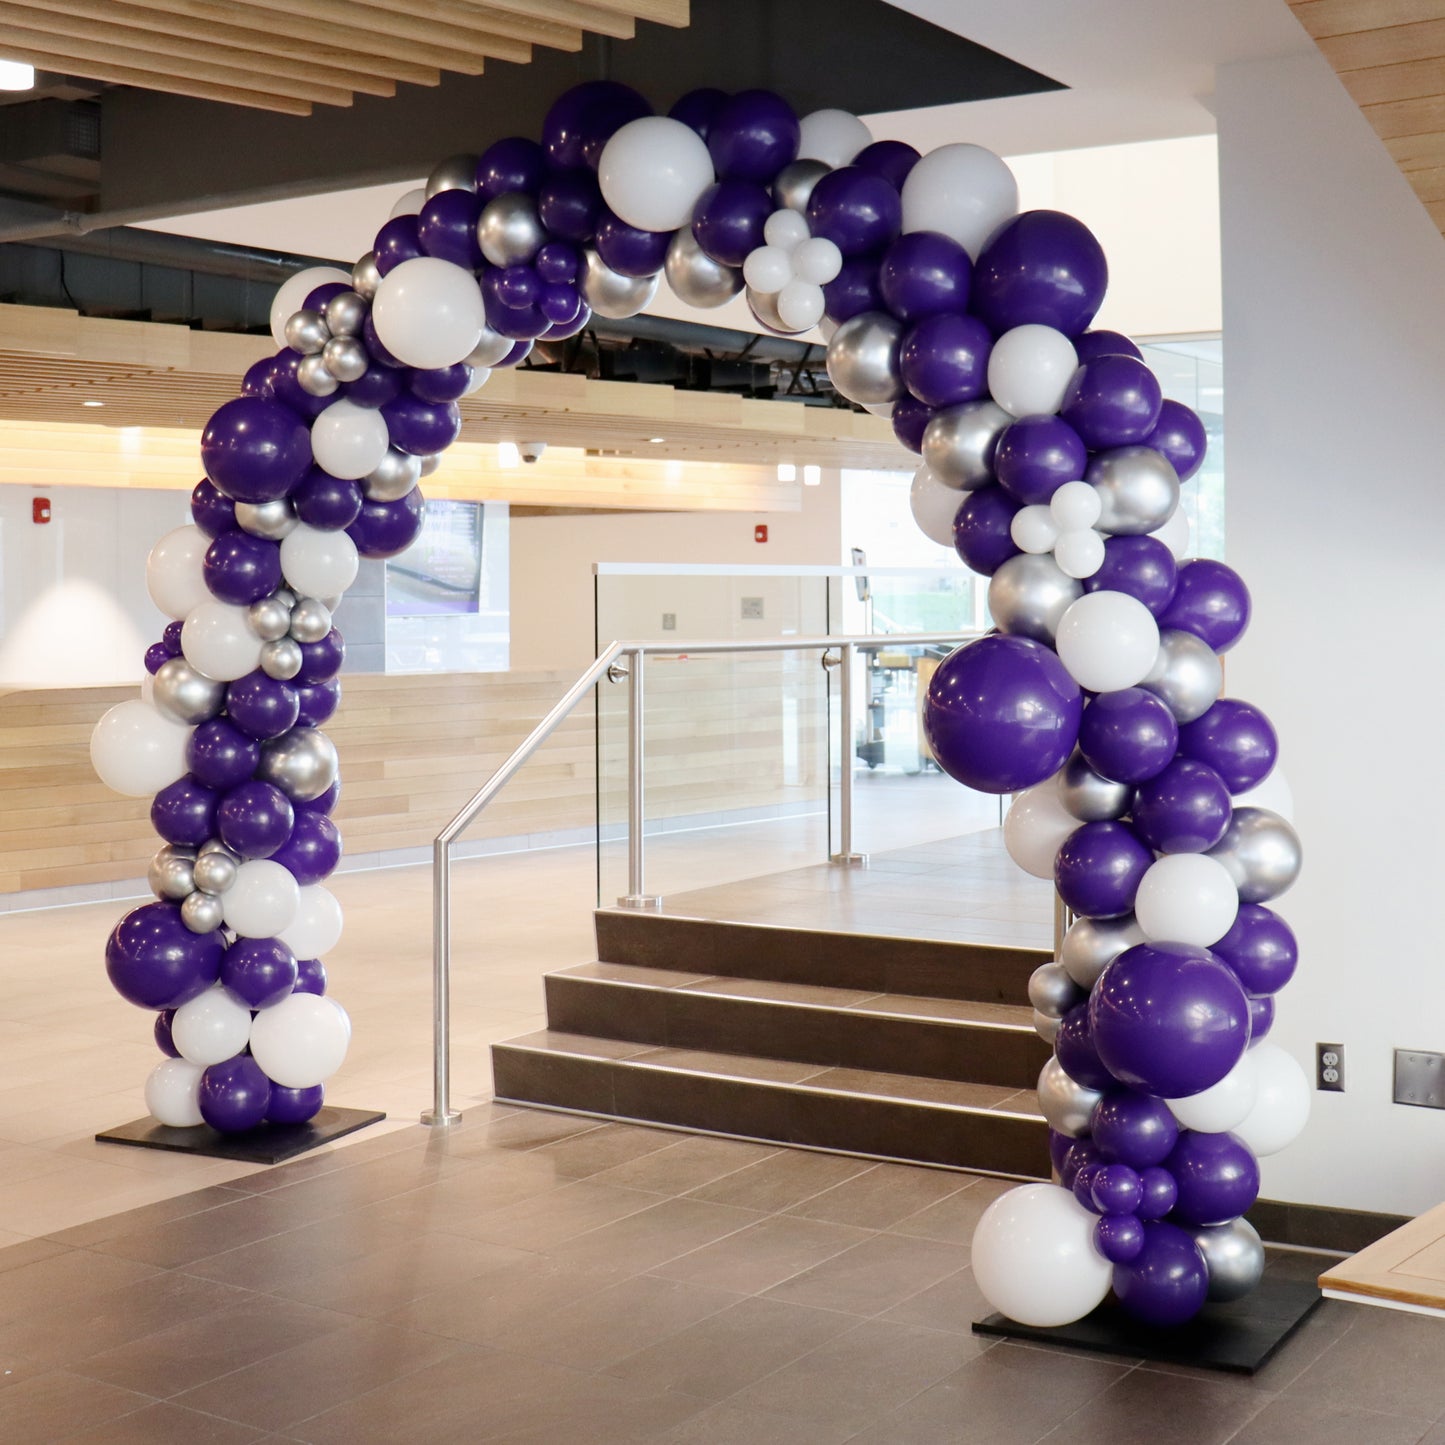 Balloon Arch Frame Tutorial and Plans | Digital Plans